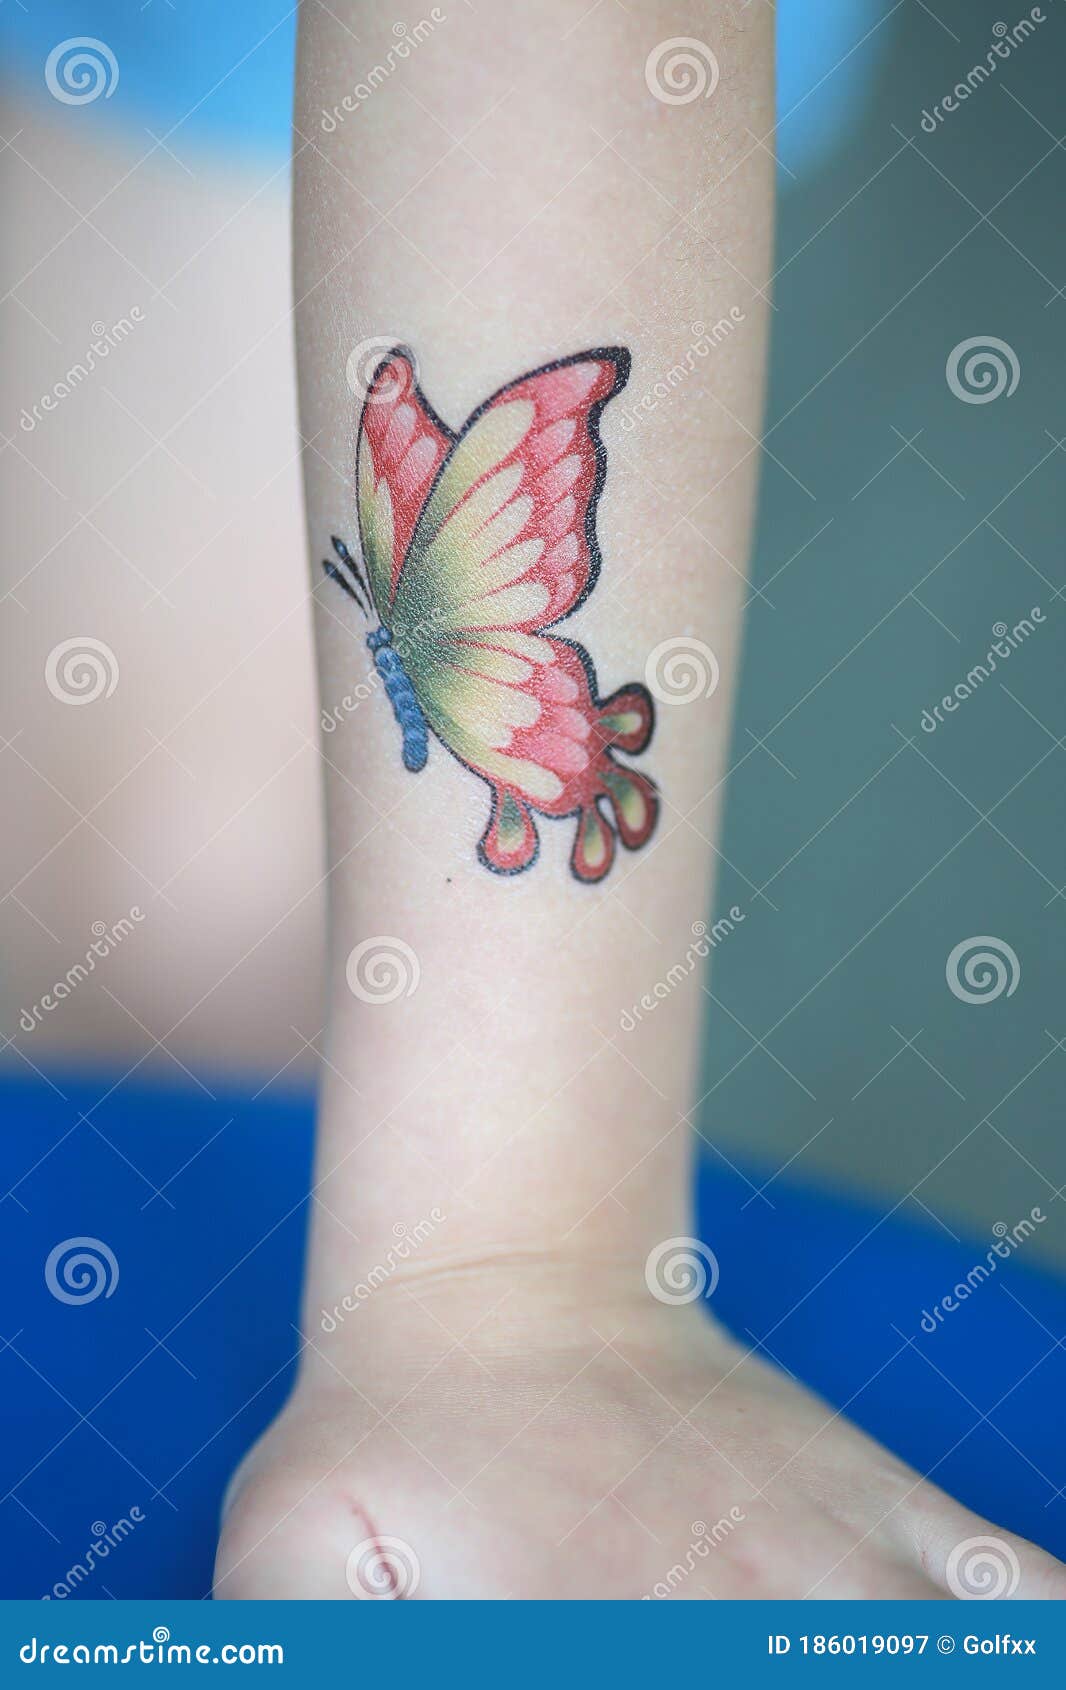 Share 58+ tattoo butterfly in hand - in.cdgdbentre